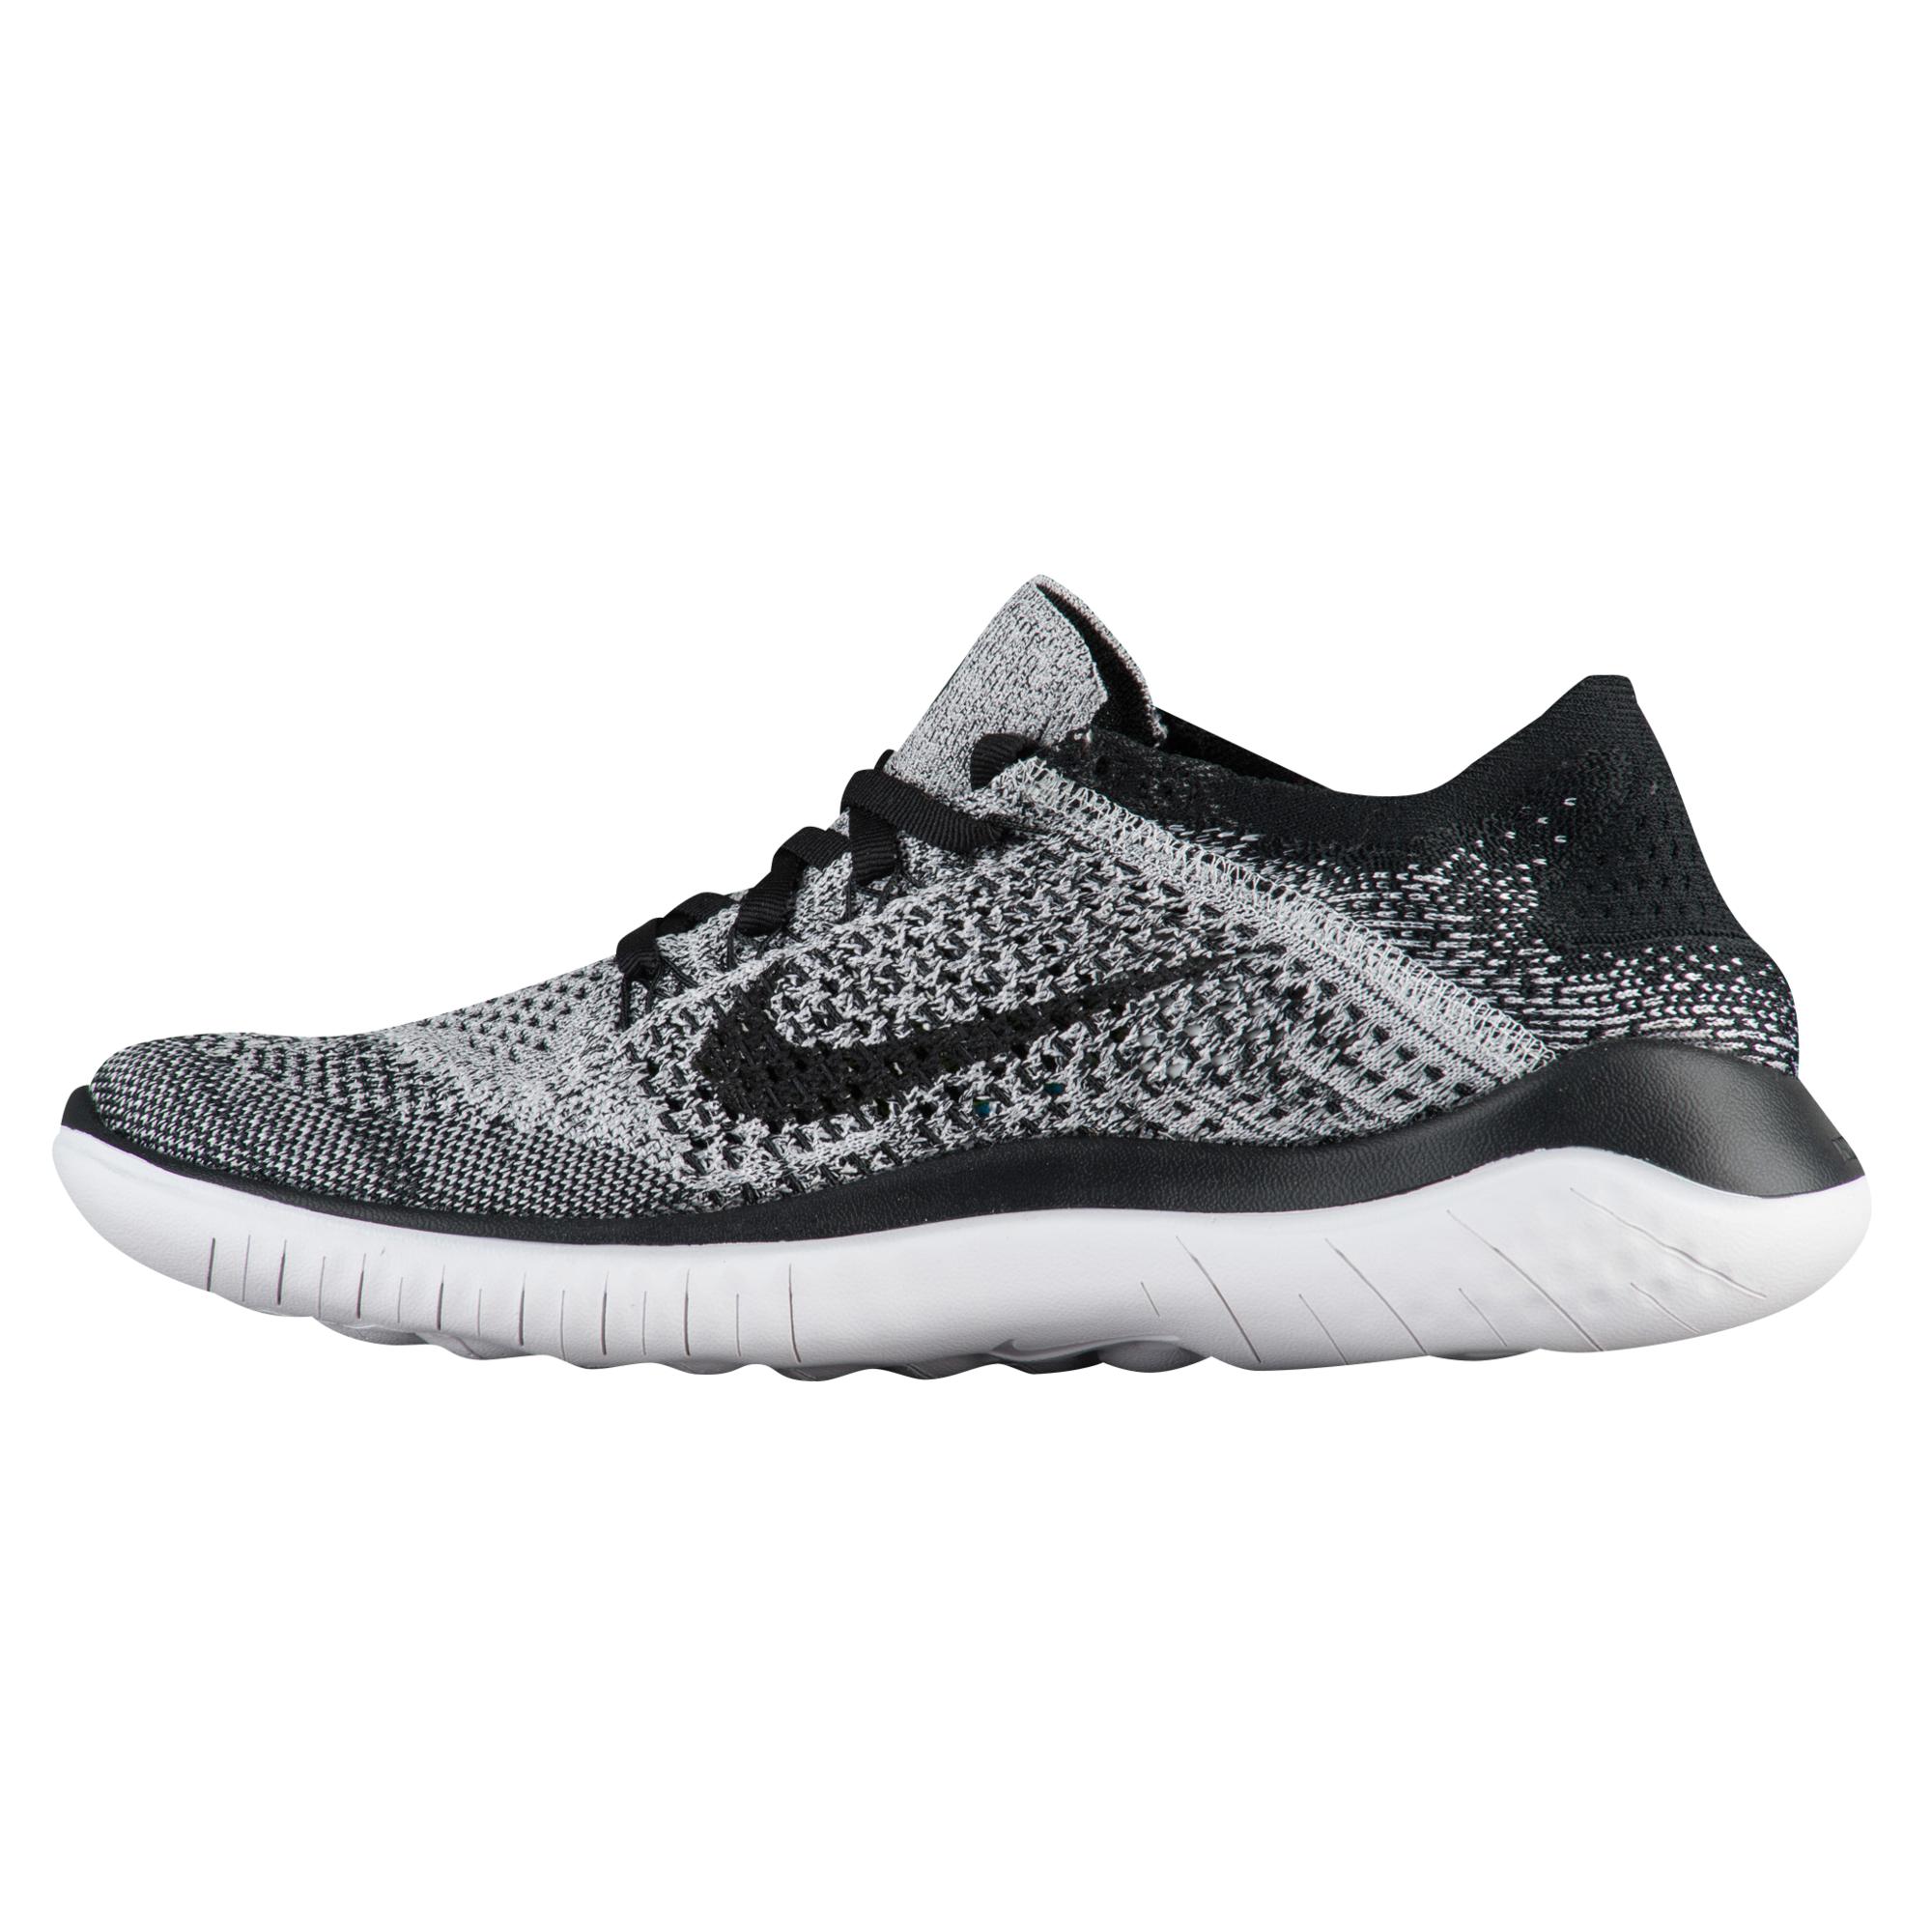 Nike Free Rn Flyknit 2018 Running Shoes in White (Black) - Save 27